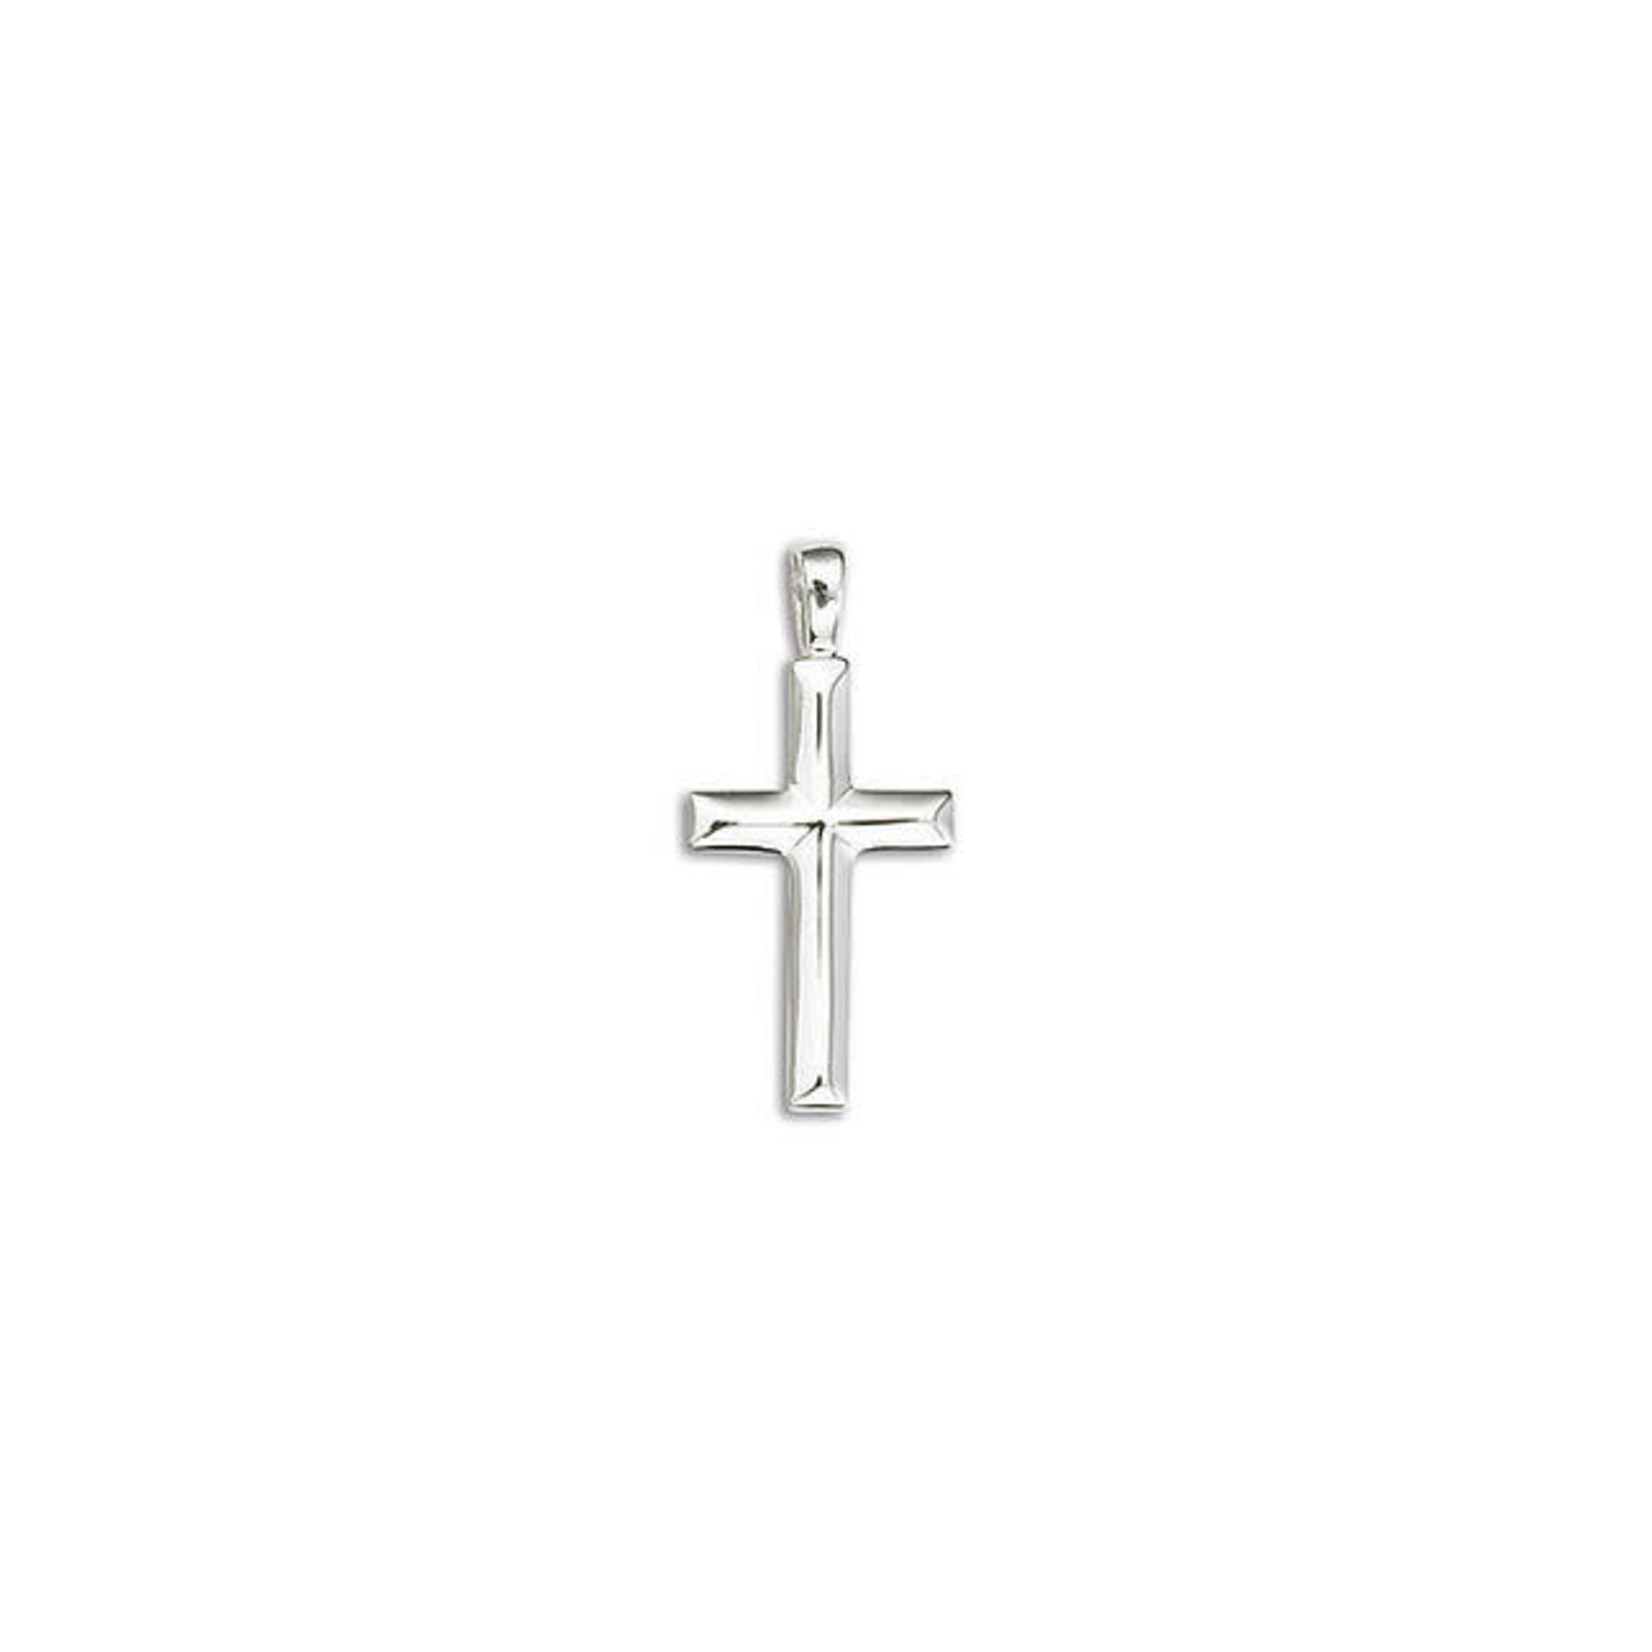 Sterling Silver Medium Beveled Cross on 16-18" Cable Chain